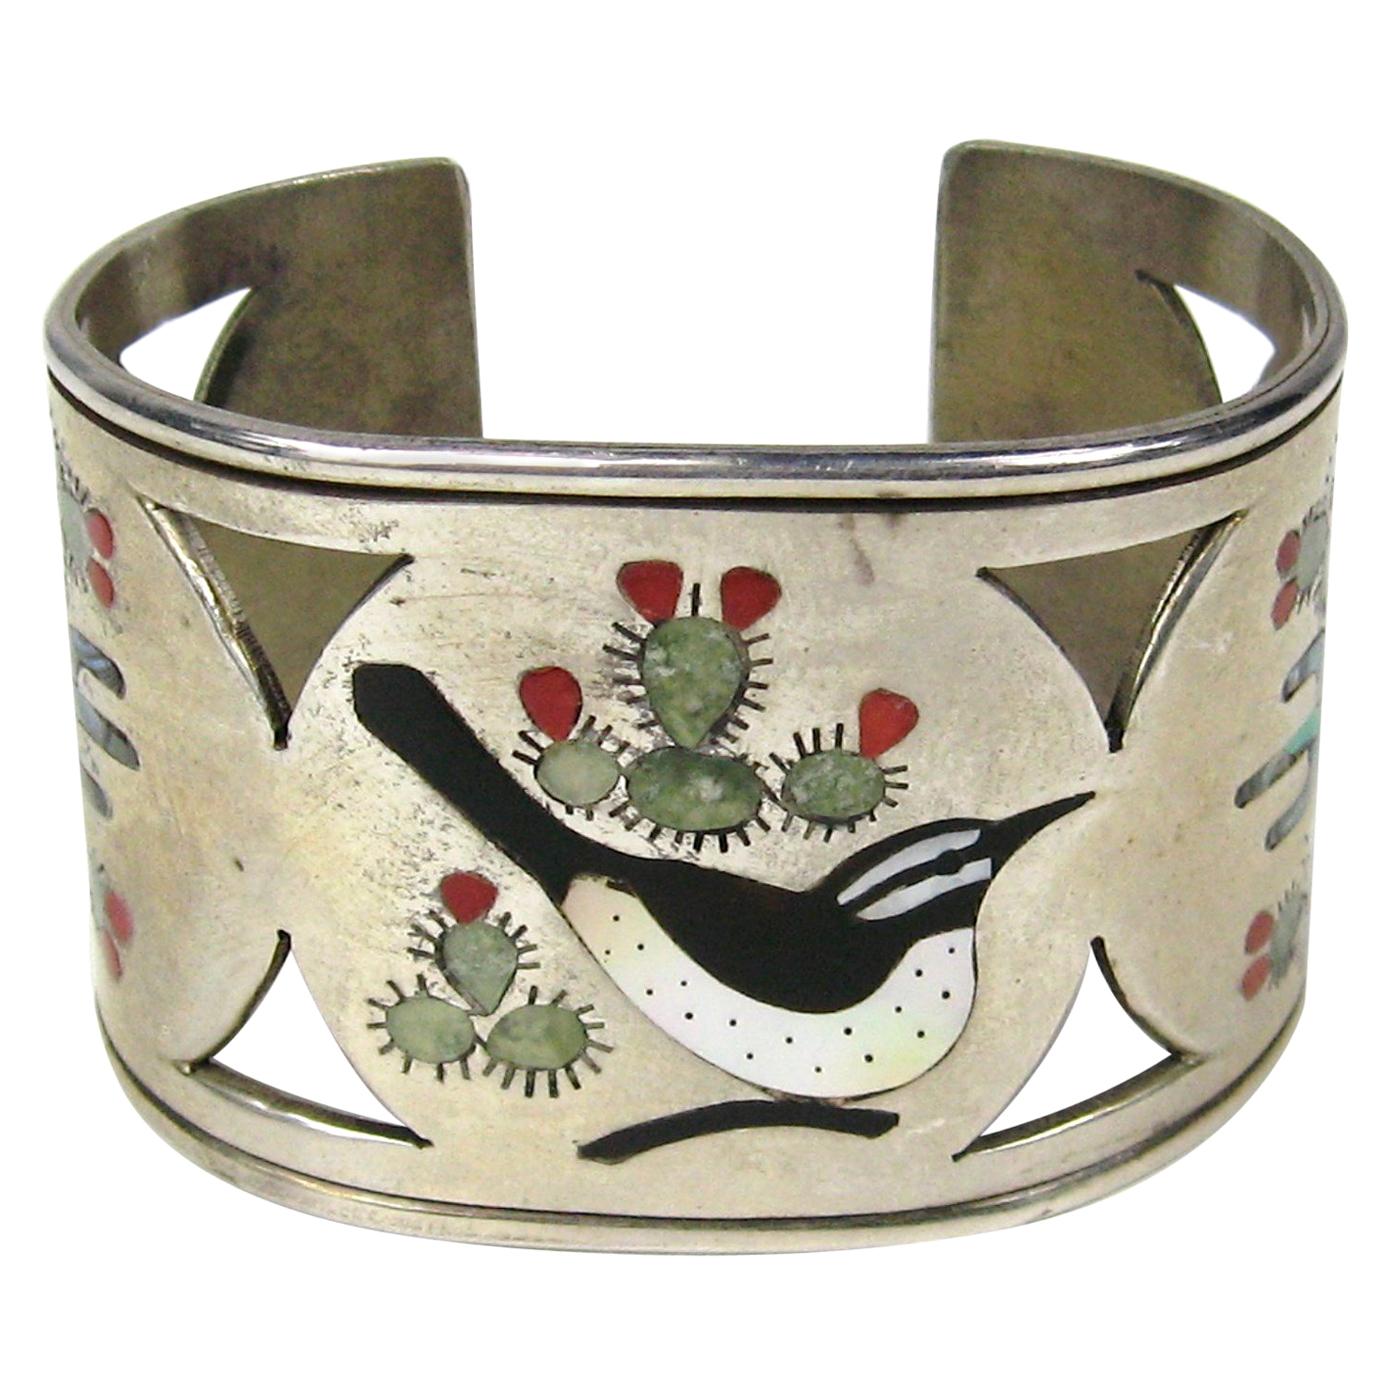  Sterling Silver ZUNI Cuff Bird Cactus Coral Mother of pearl Bracelet